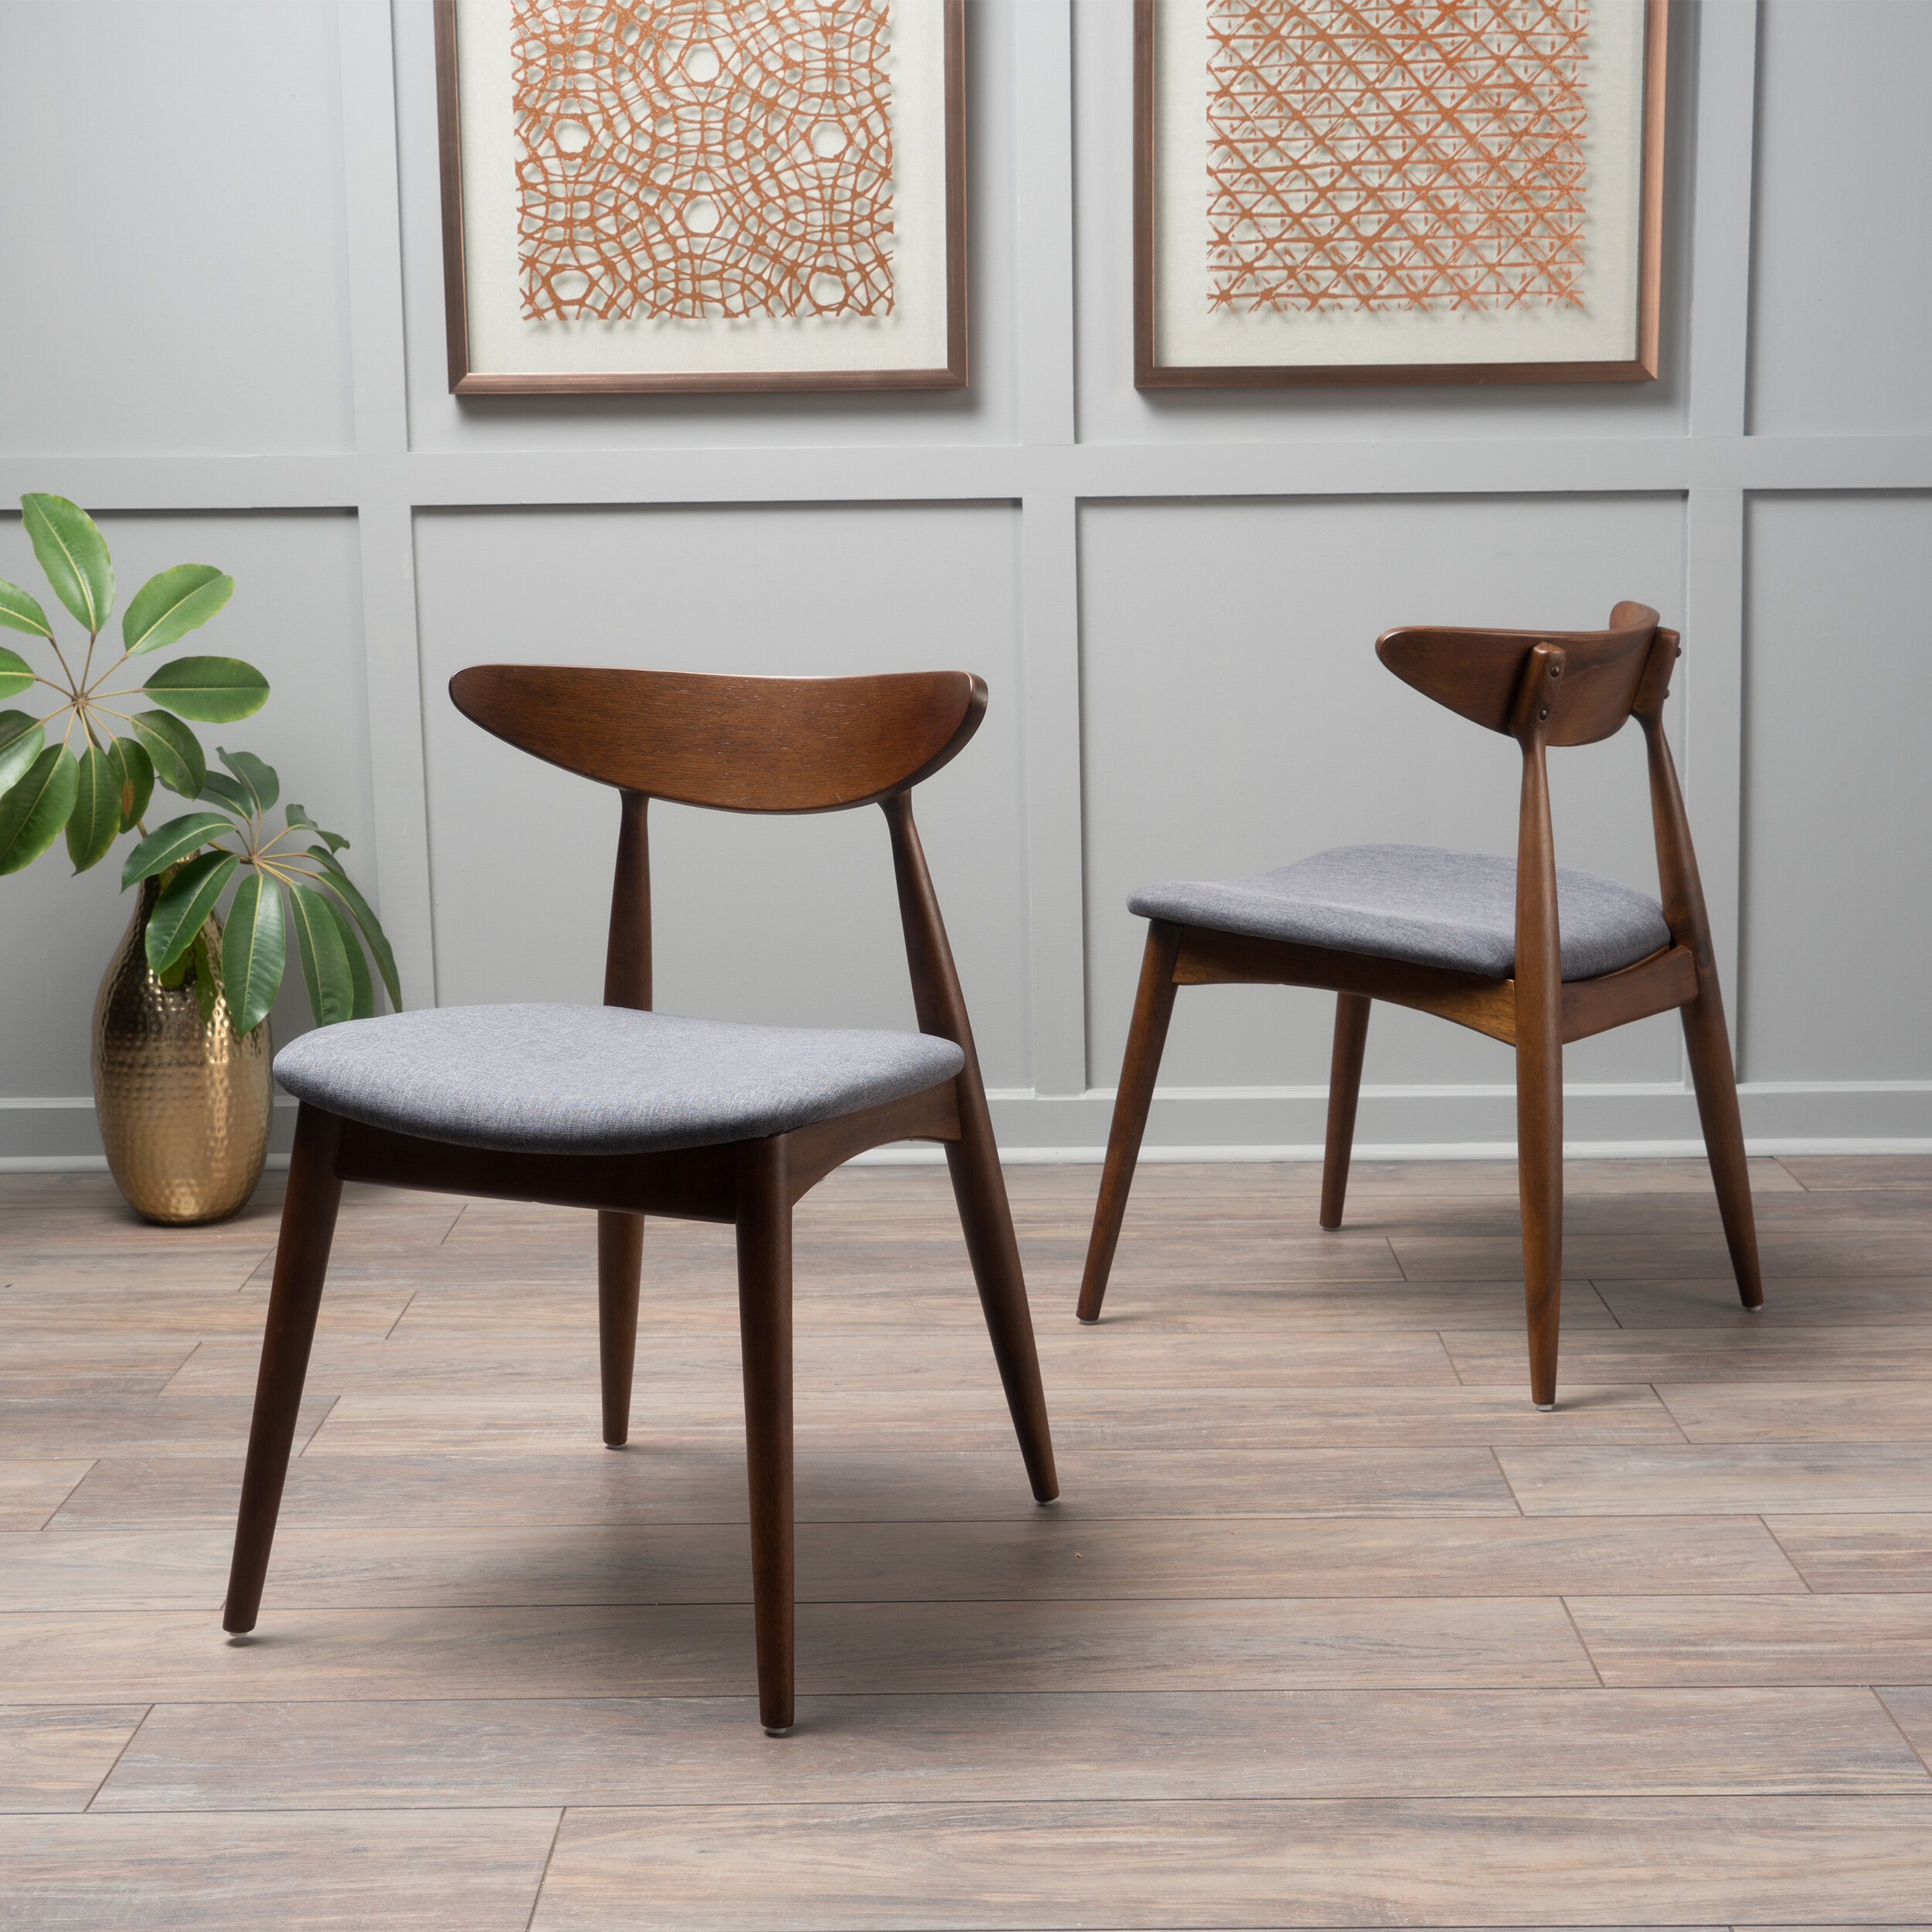 Details about   Modern Solid Wood Dining Chair 